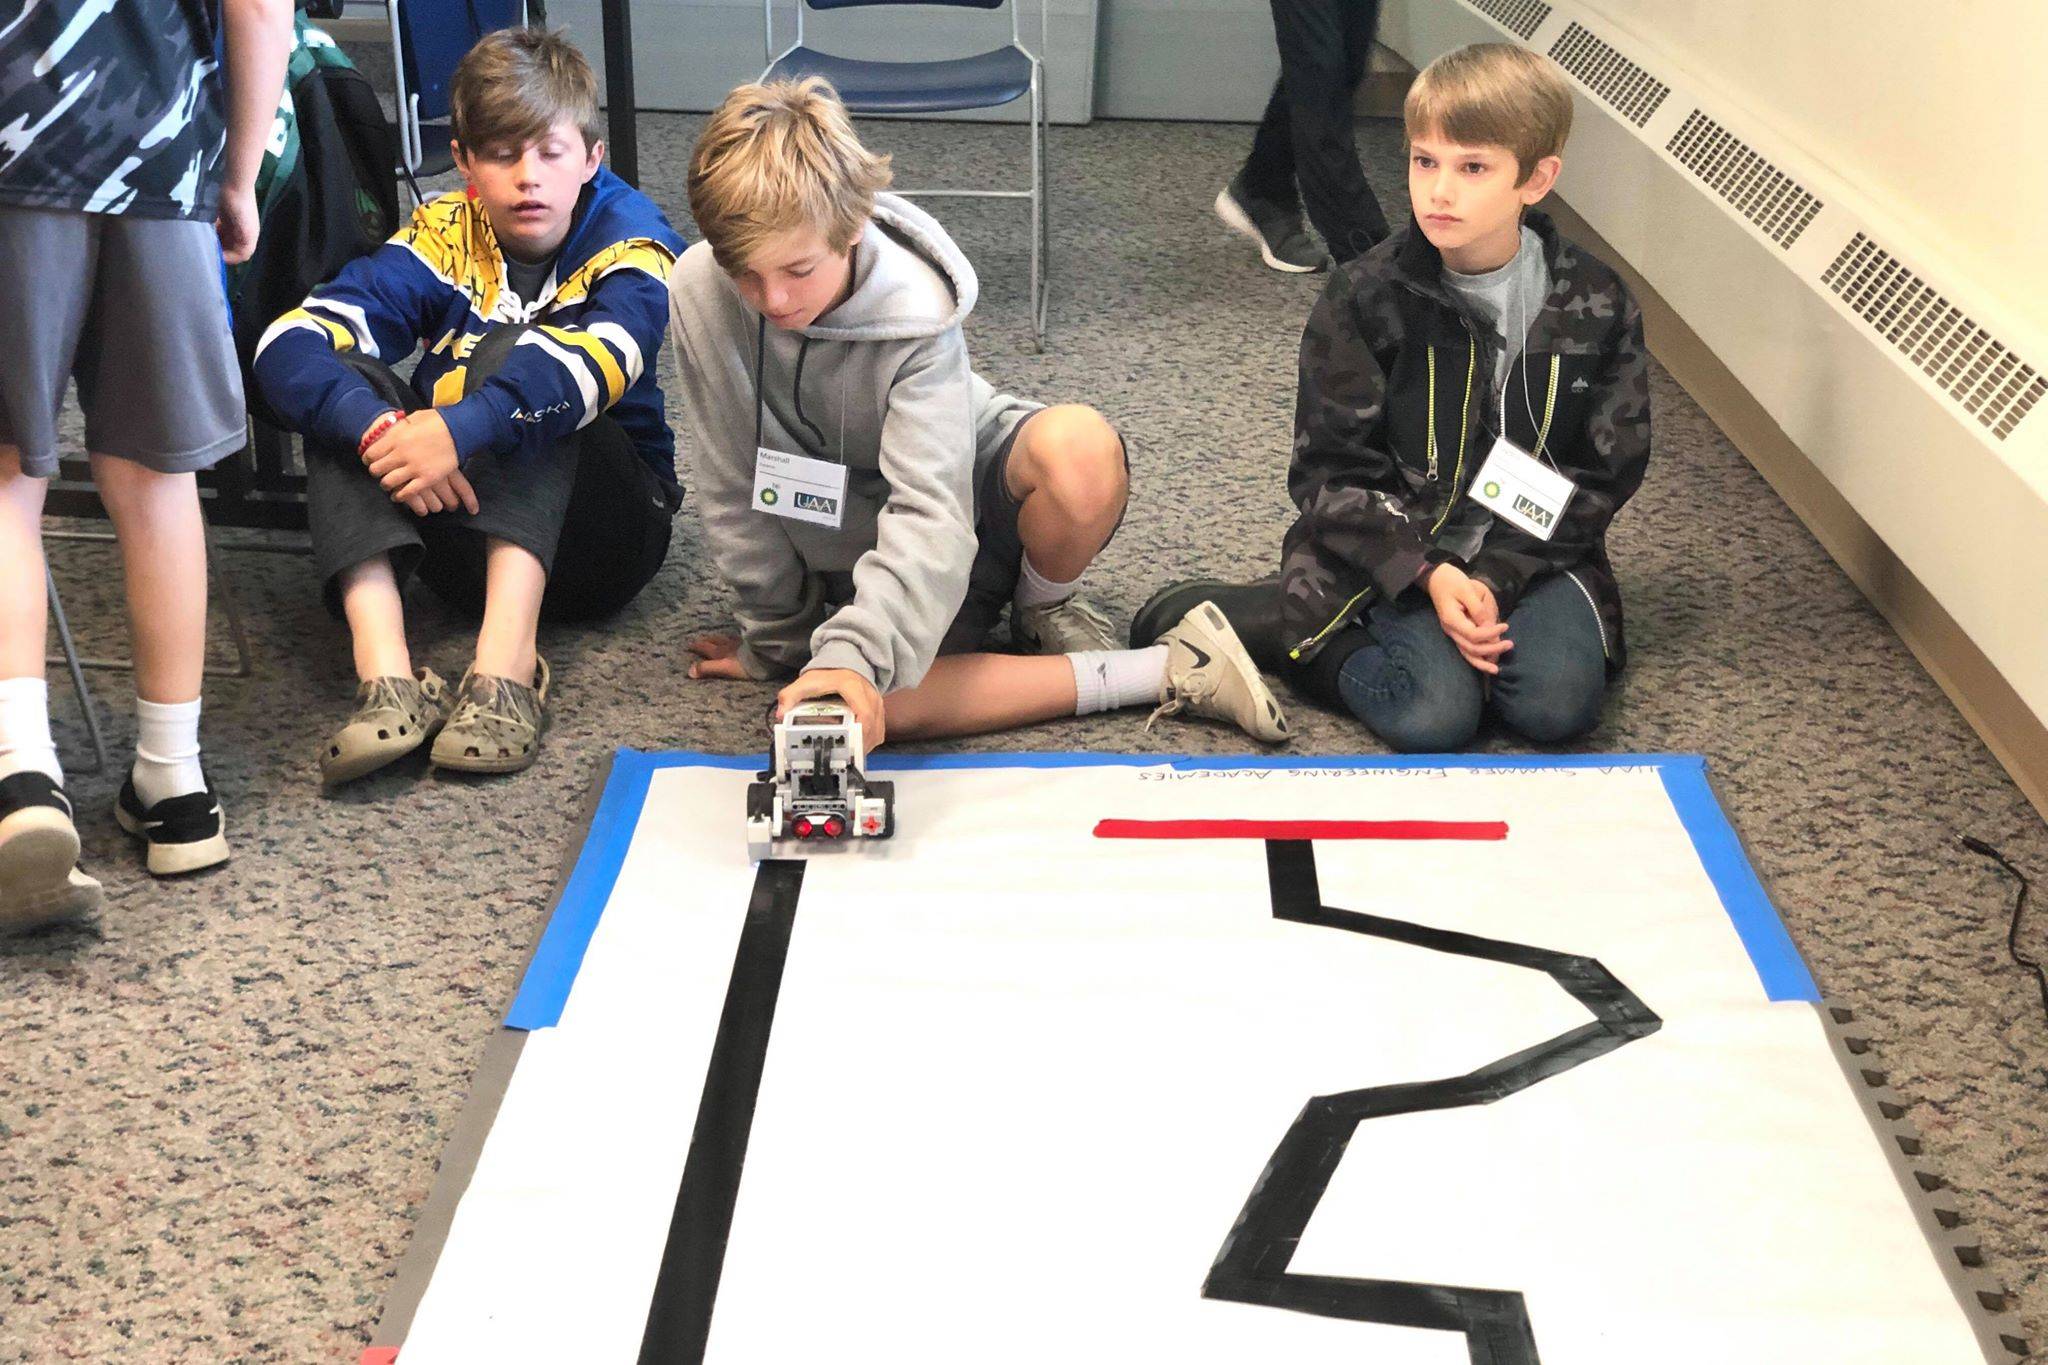 Students put their robot to the test in one of the many challenges in the Lego robotics UAA College of Engineering Summer Engineering Academies, on Wednesday, June 26, 2019, at the Kenai Peninsula College near Soldotna, Alaska. (Photo by Victoria Petersen/Peninsula Clarion)